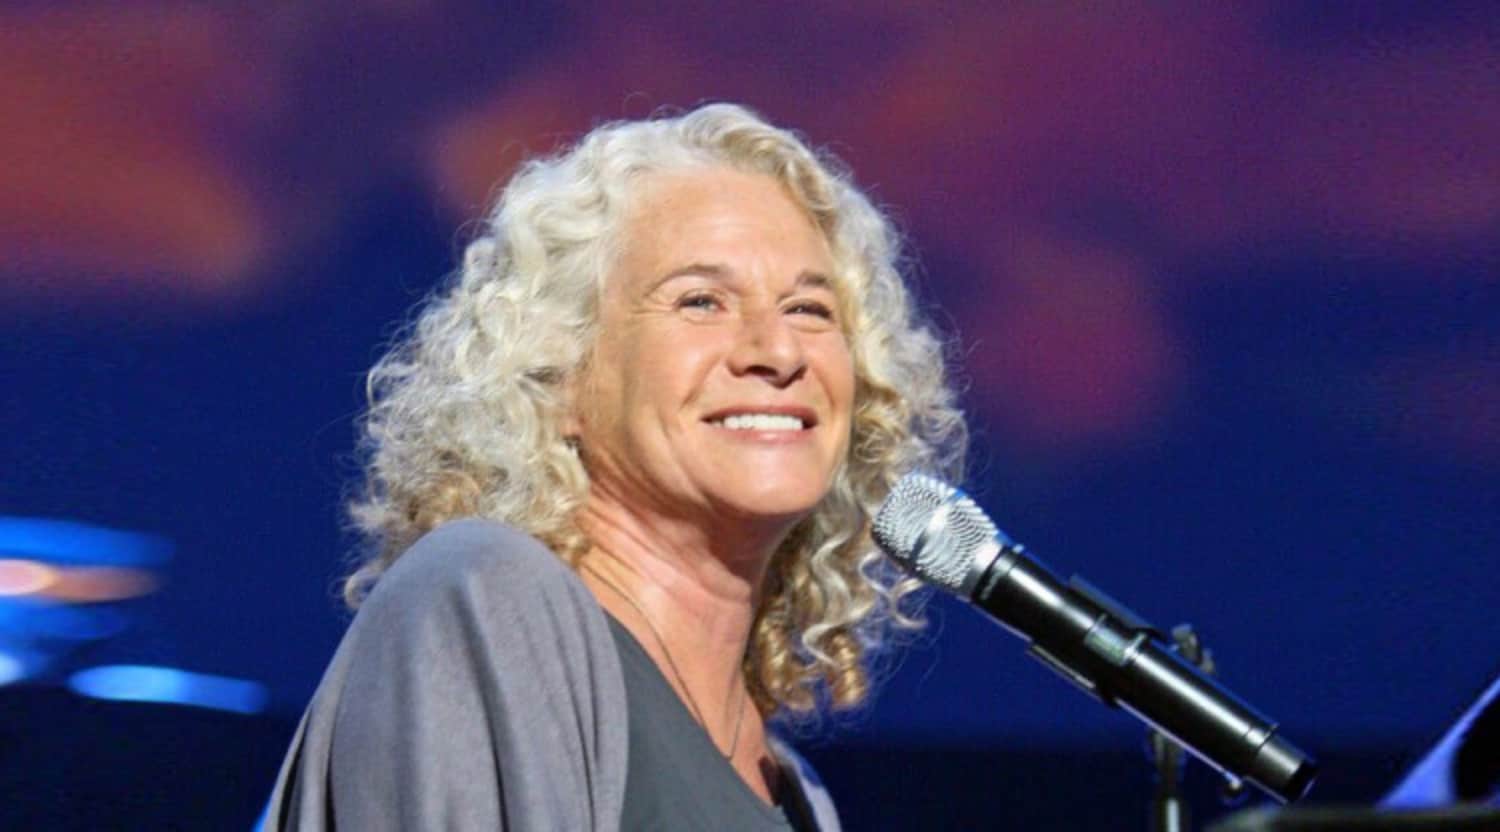 Carole King Tickets Carole King Concert Tickets And Tour Dates